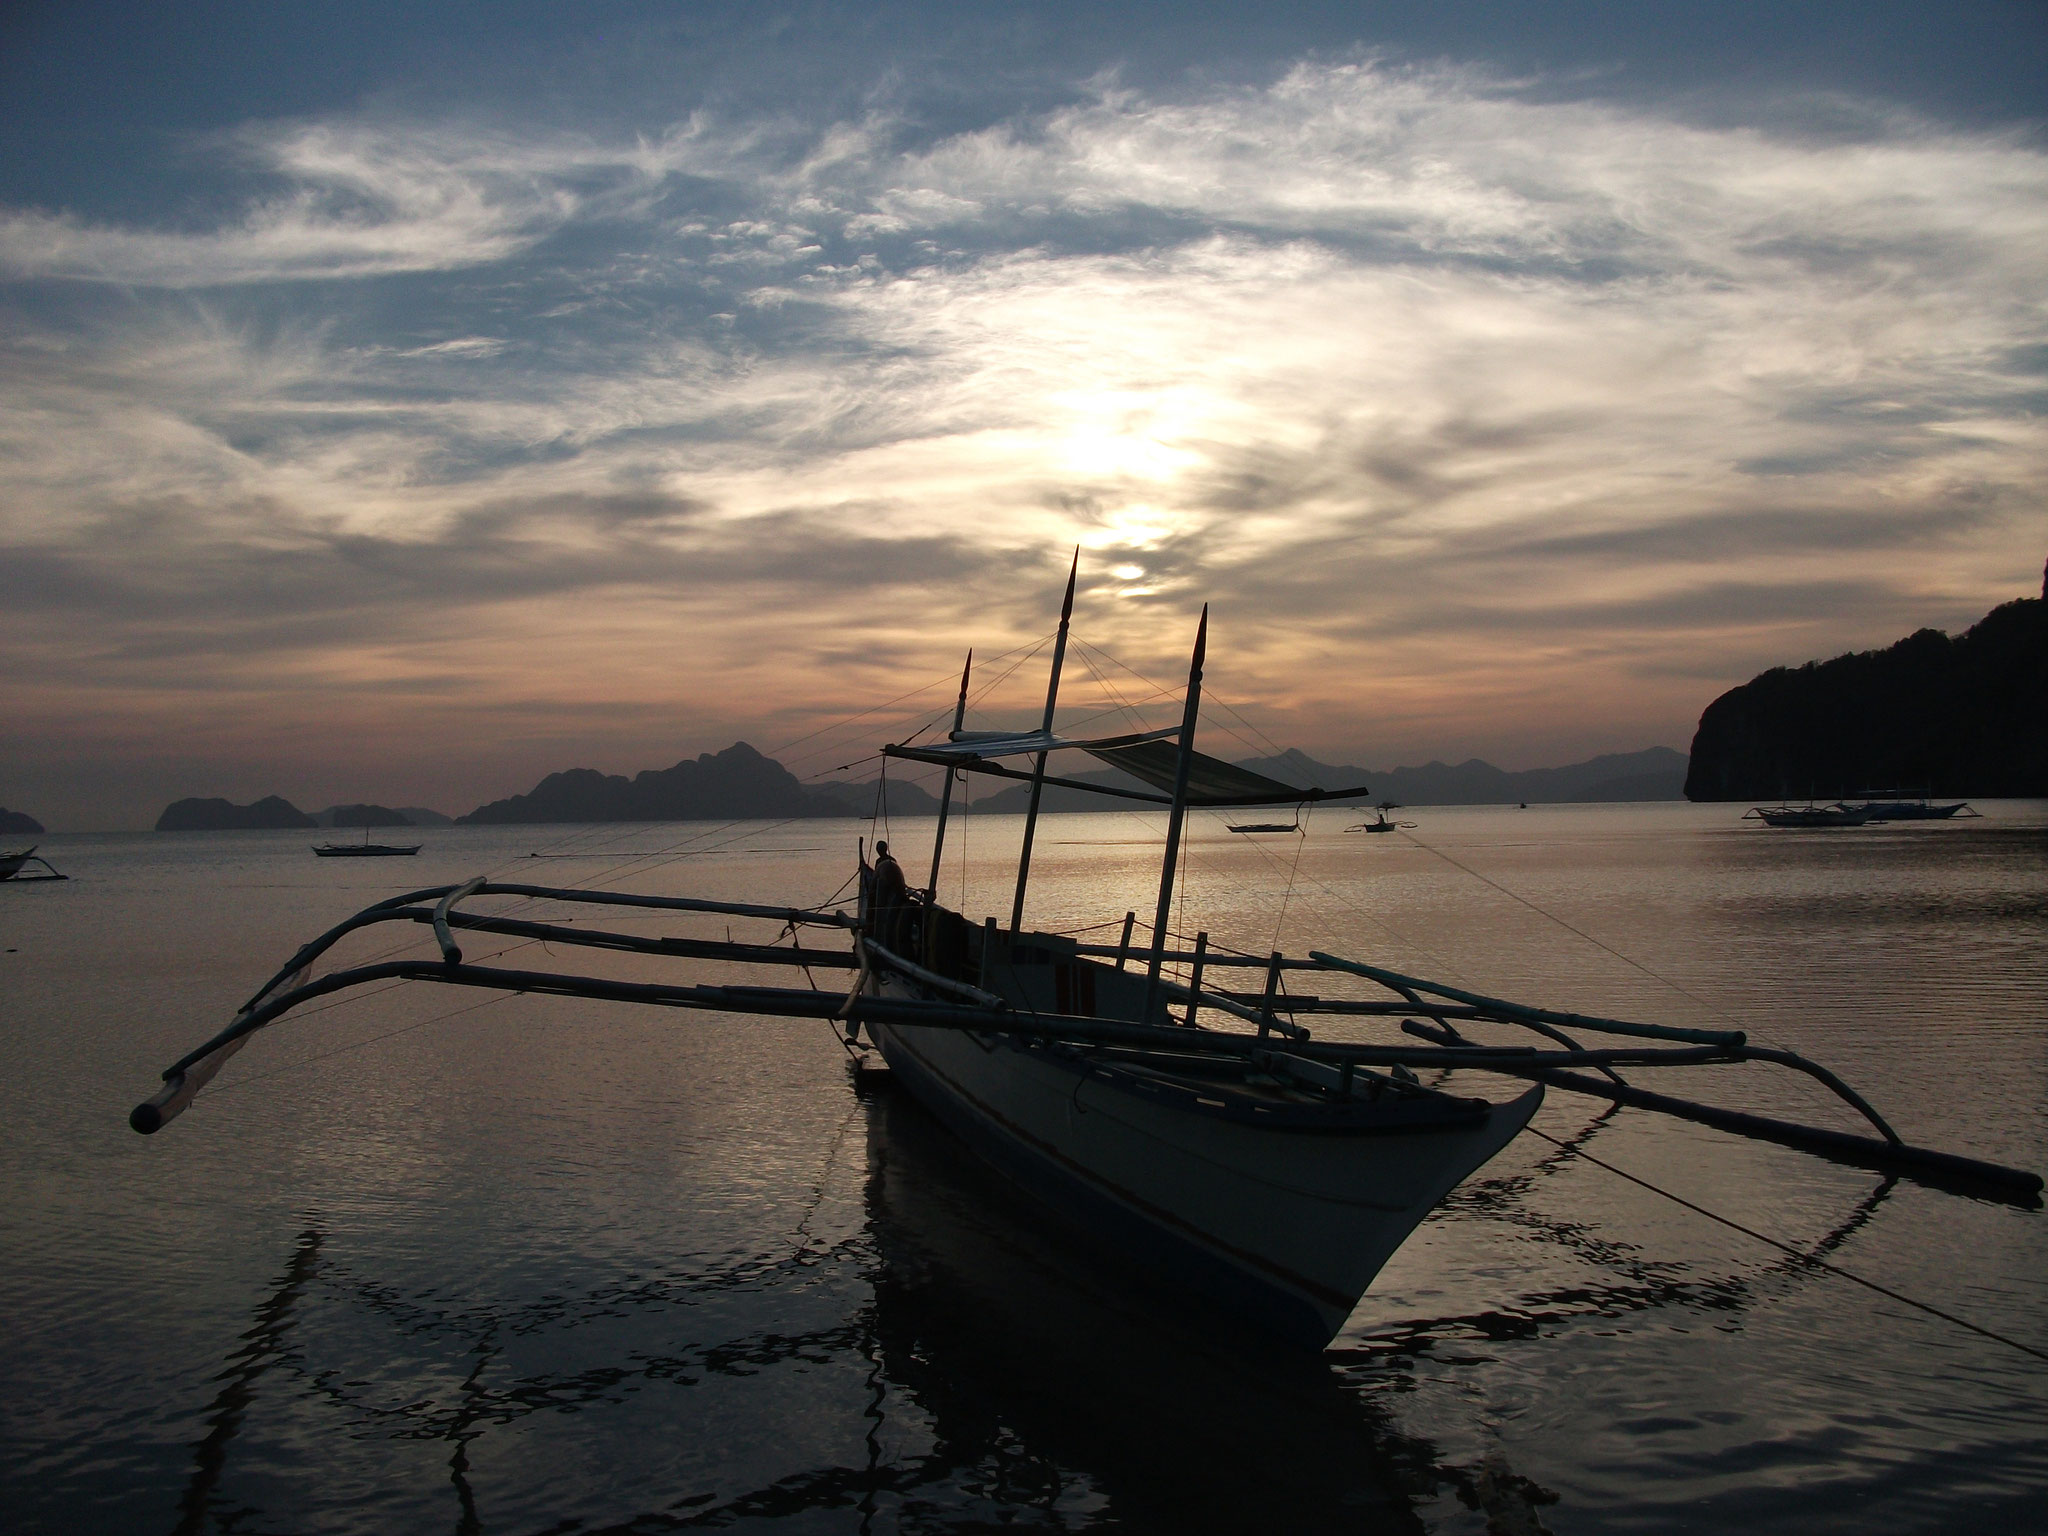 El Nido sunsets are the best